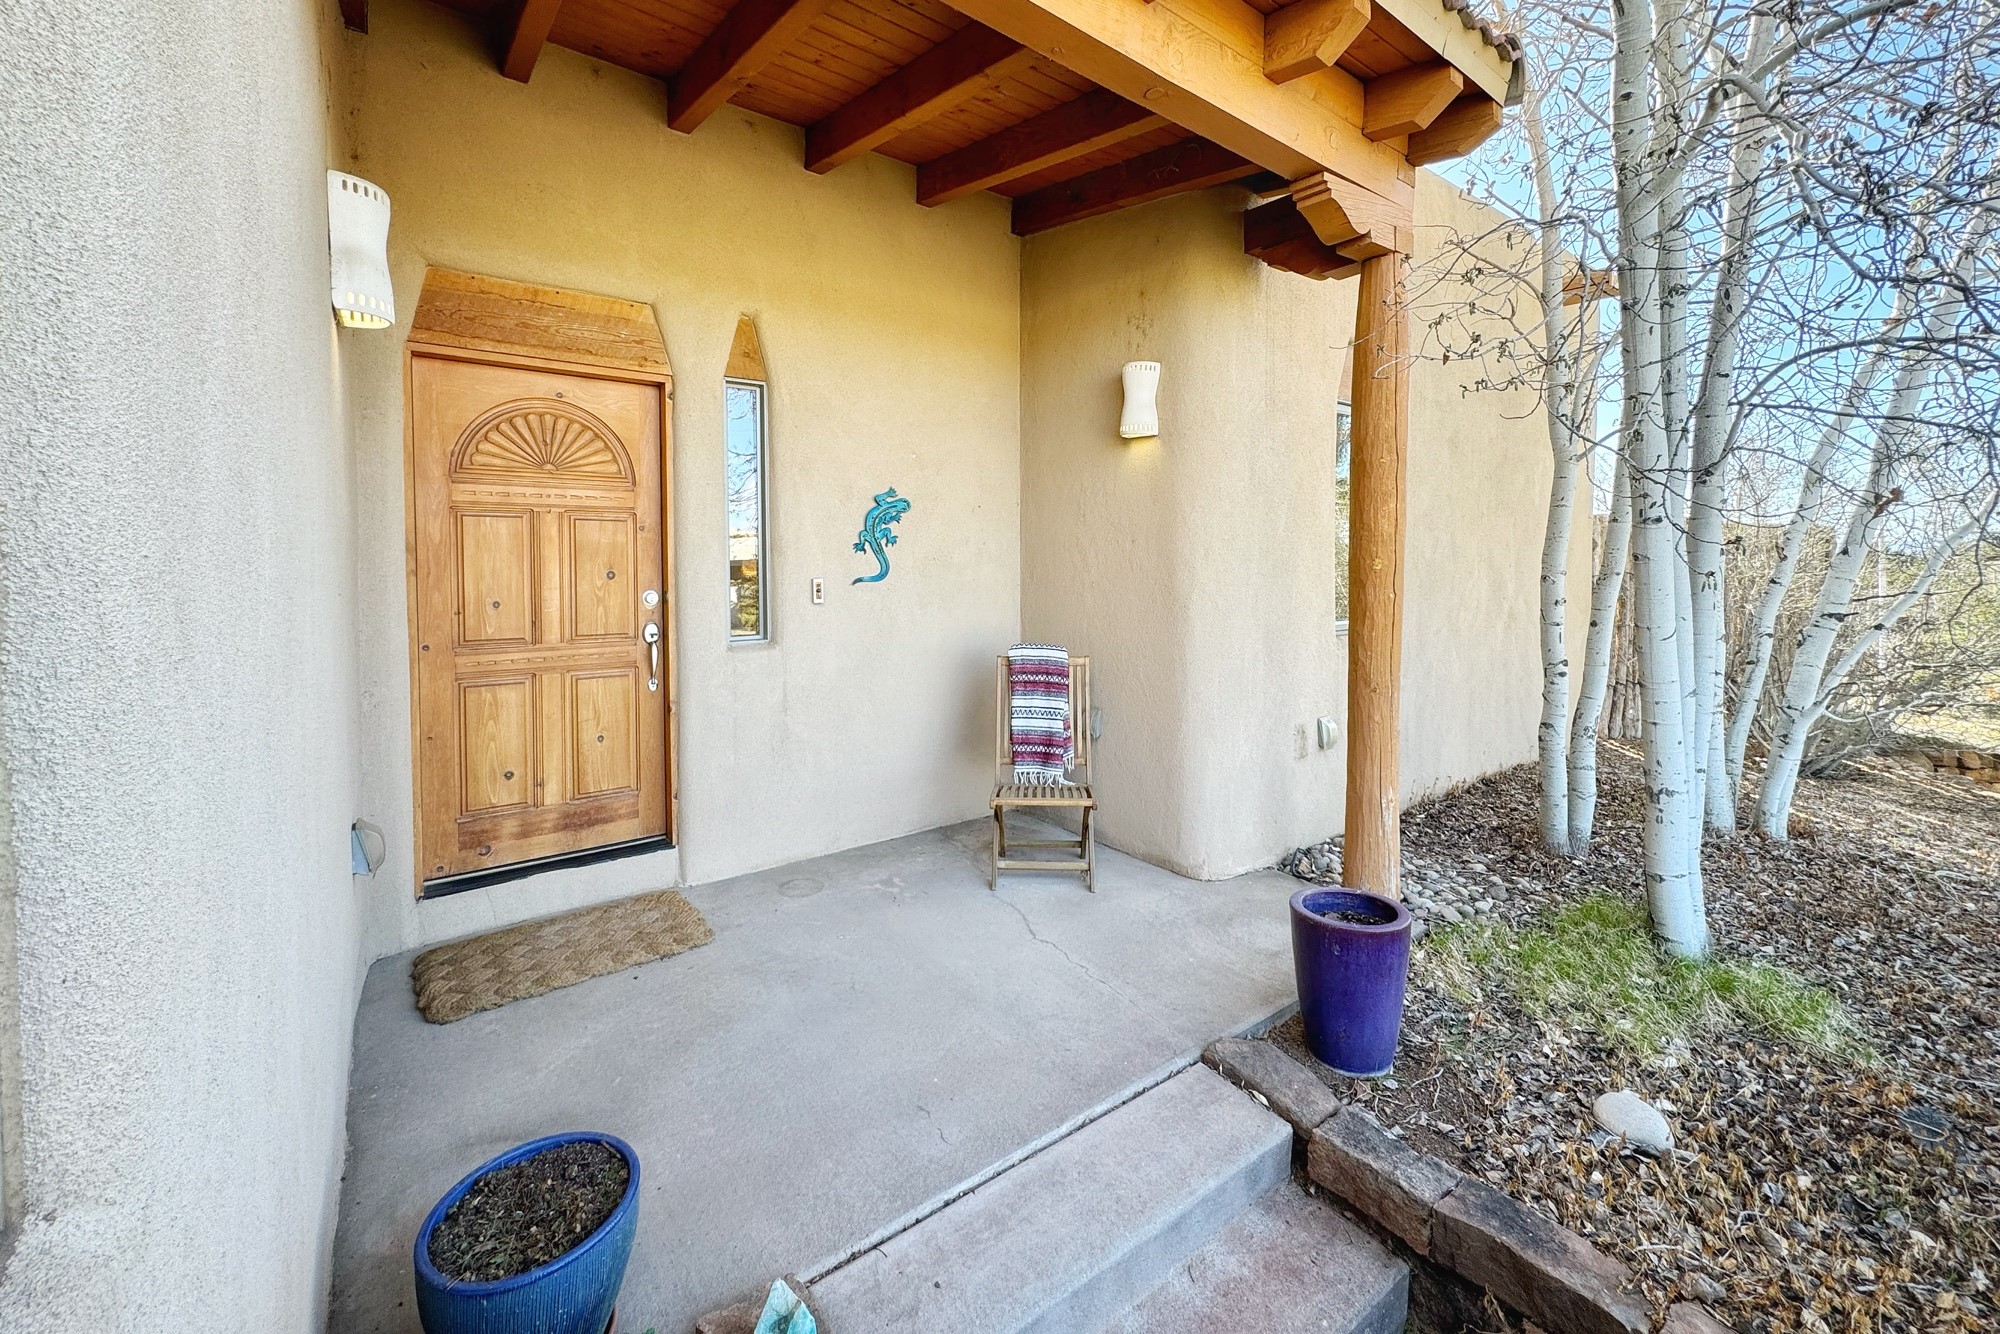 3028 Governor Lindsey, Santa Fe, New Mexico 87505, 4 Bedrooms Bedrooms, ,4 BathroomsBathrooms,Residential,For Sale,3028 Governor Lindsey,202401270